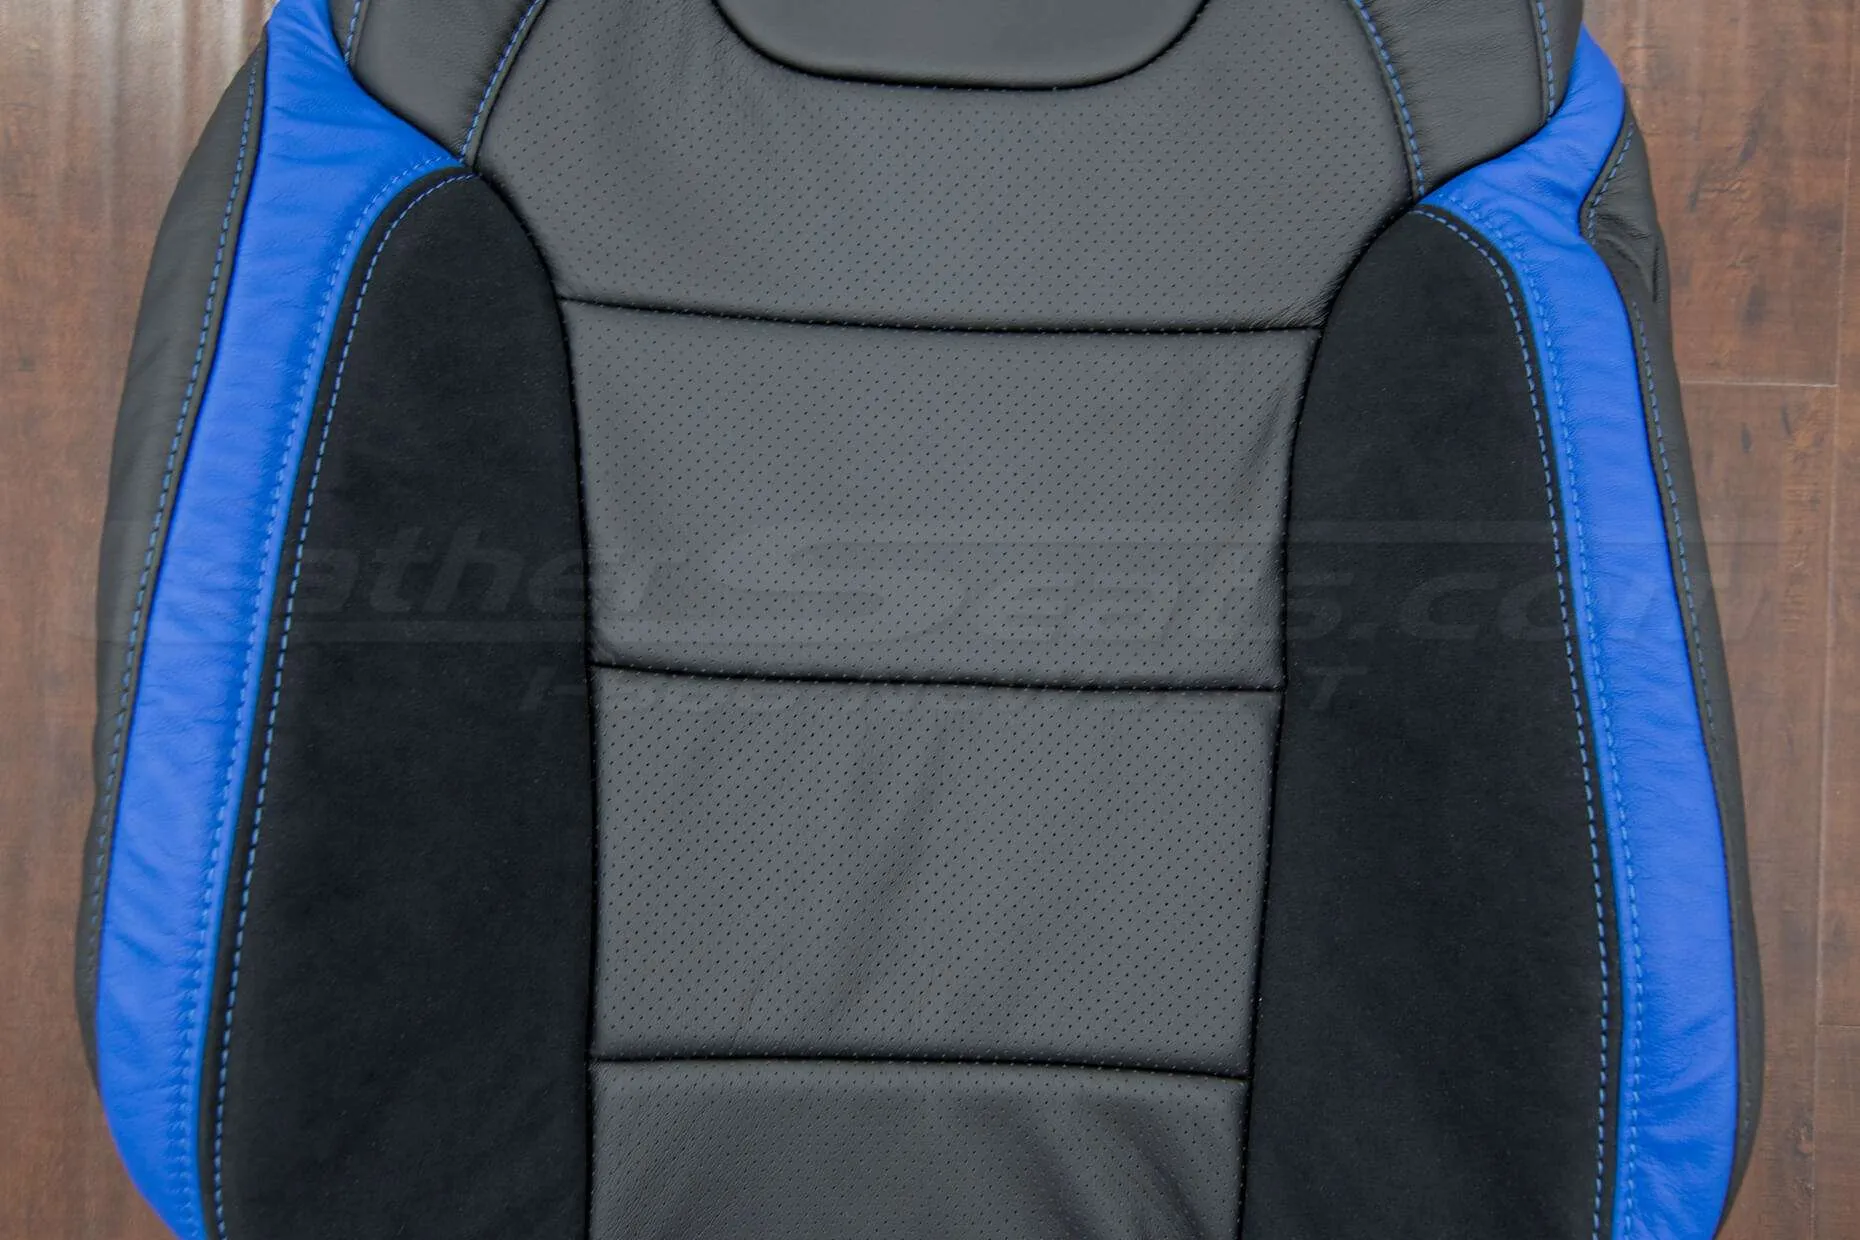 Ford Raptor Upholstery Kit - Black & Cobalt - Suede Wings & perforated body